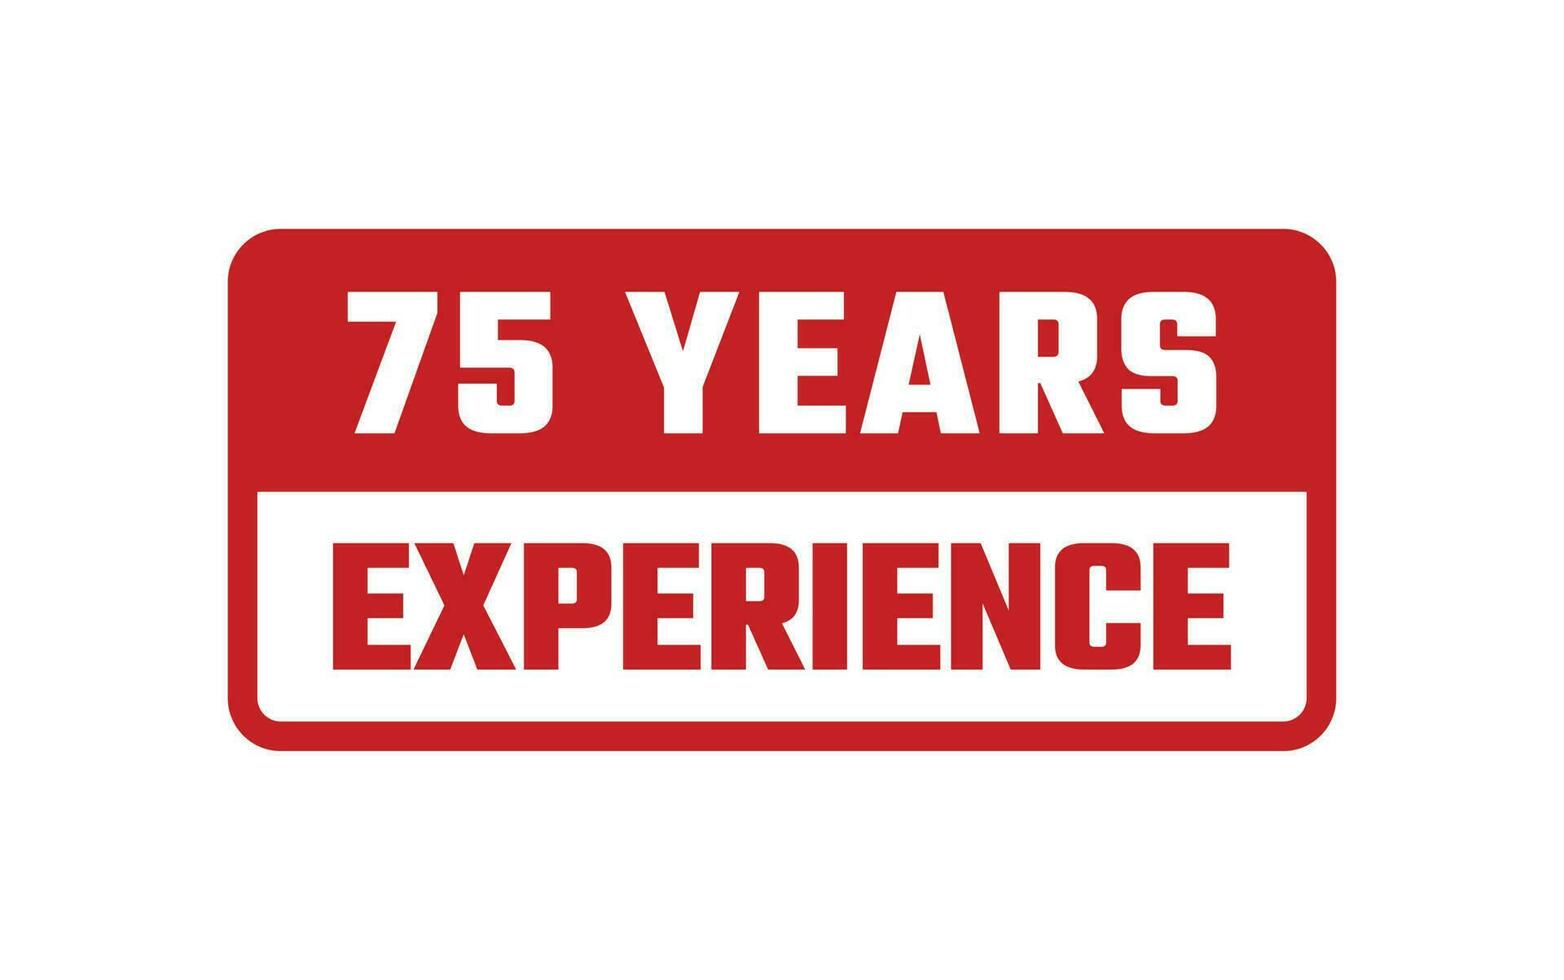 75 Years Experience Rubber Stamp vector